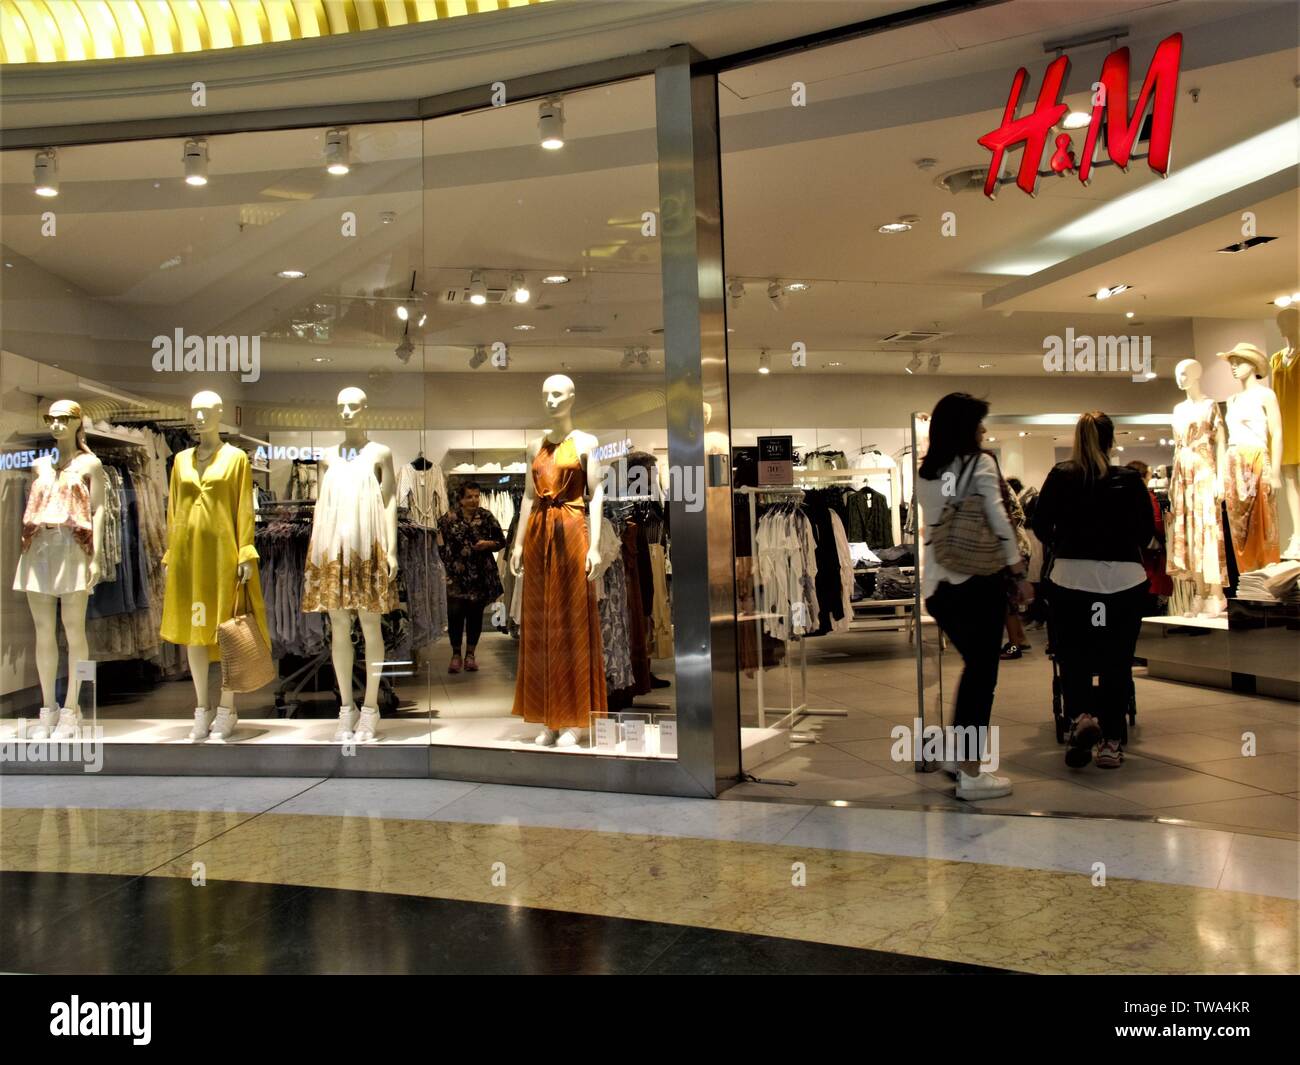 H&M FASHION STORE EINGANG IN EUROMA 2 SHOPPING CENTER IN ROM  Stockfotografie - Alamy